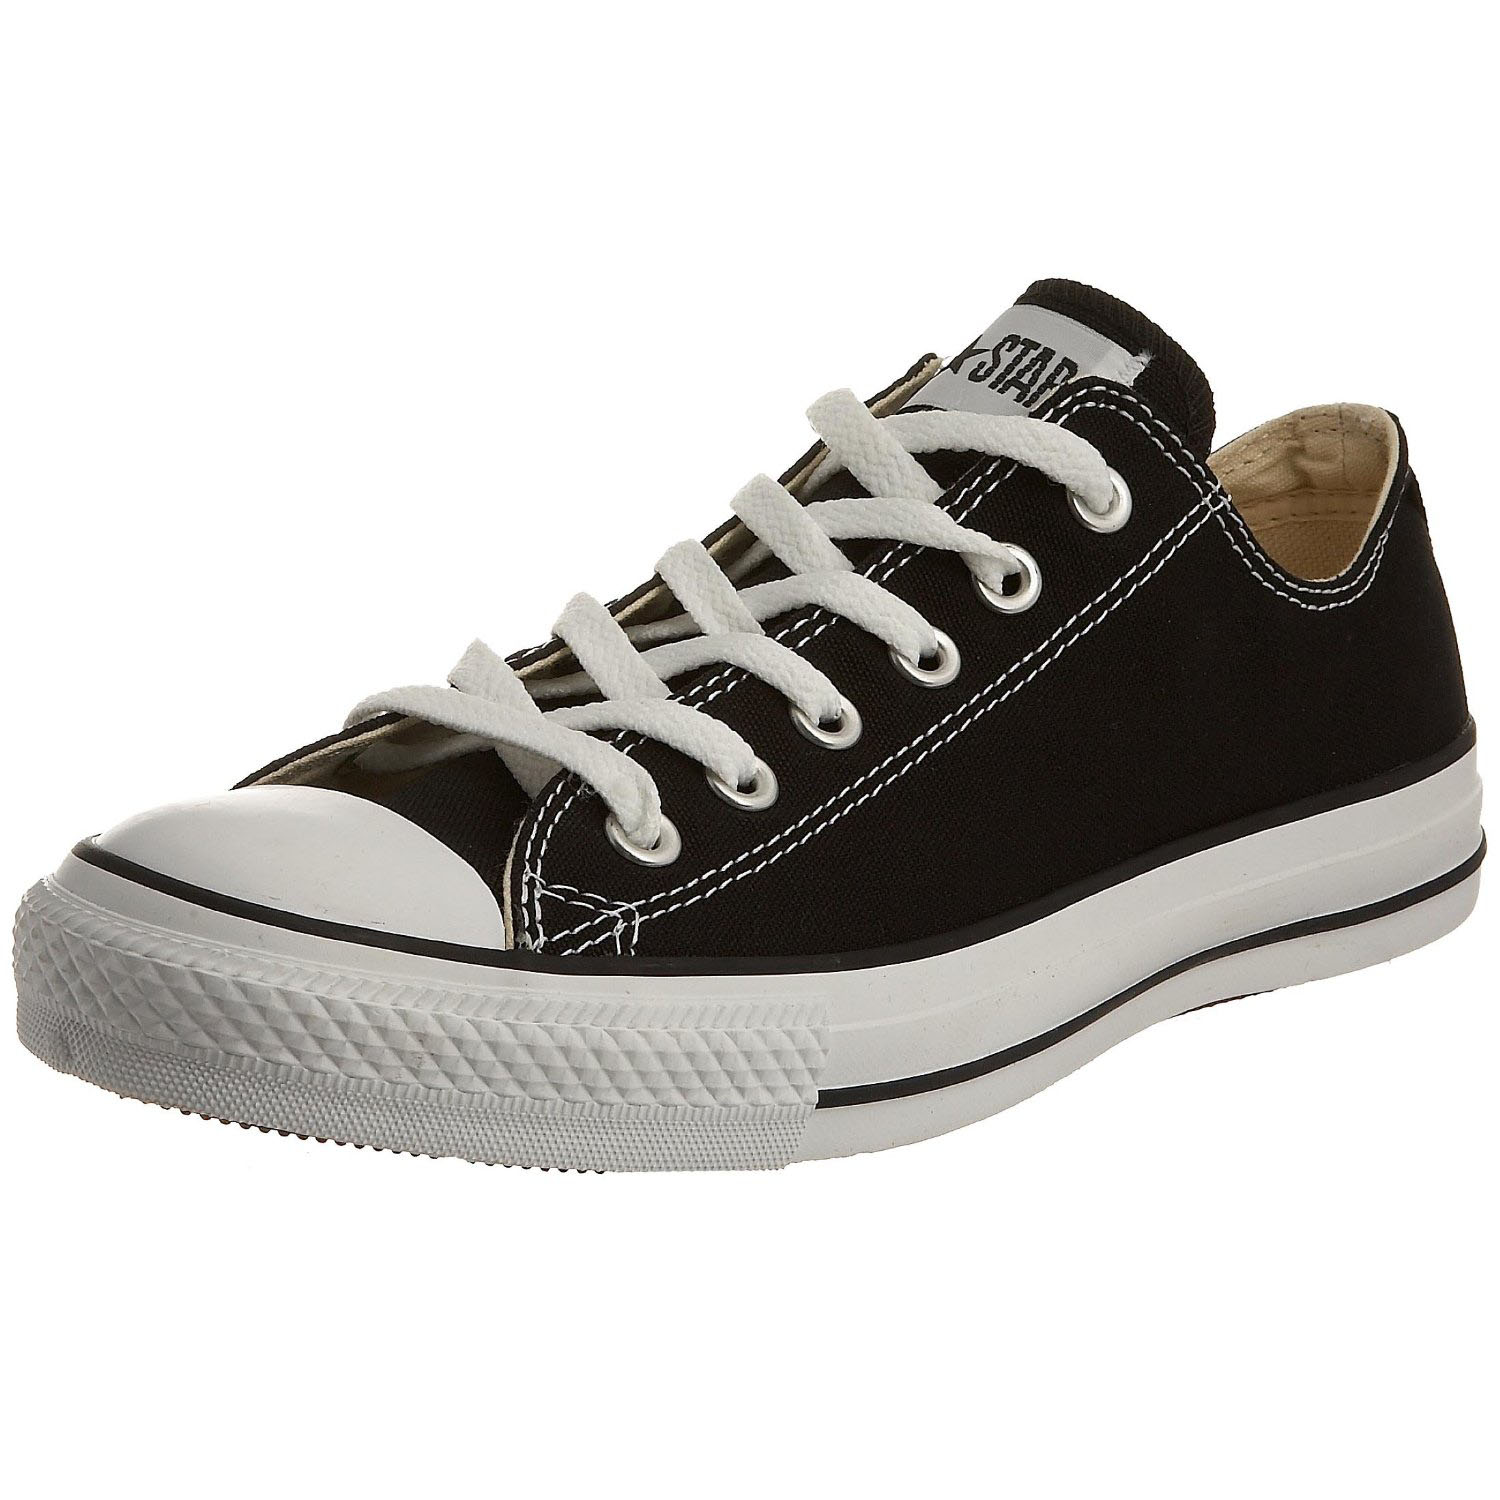 Converse Kids's CONVERSE CHUCK TAYLOR ALL STAR YTHS OXFORD BASKETBALL SHOES - image 1 of 7